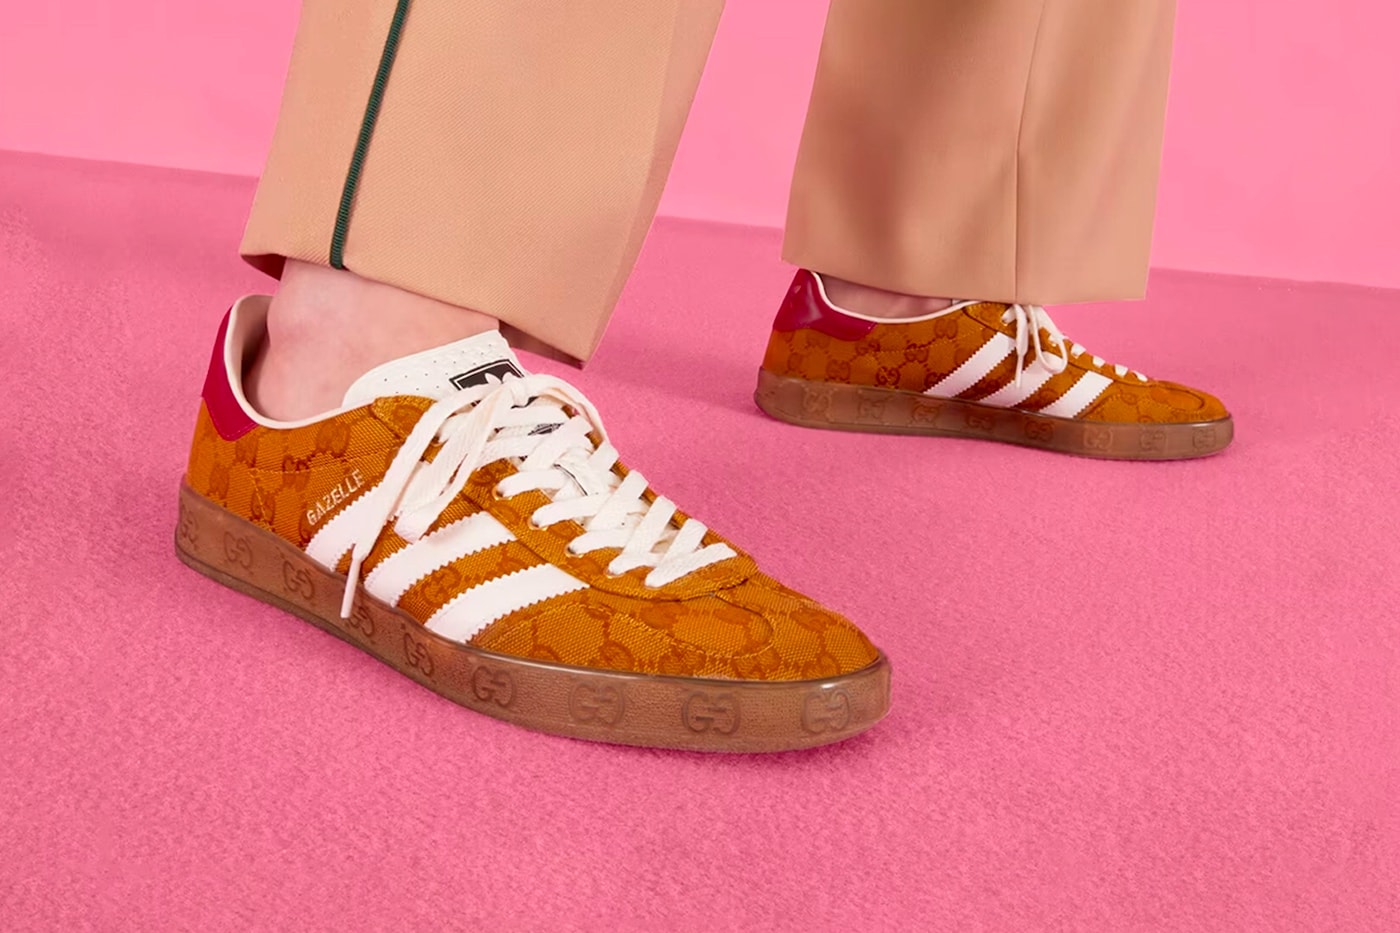 dutje huren Pogo stick sprong adidas x Gucci Gazelle Collection Releasing Again | Hypebeast